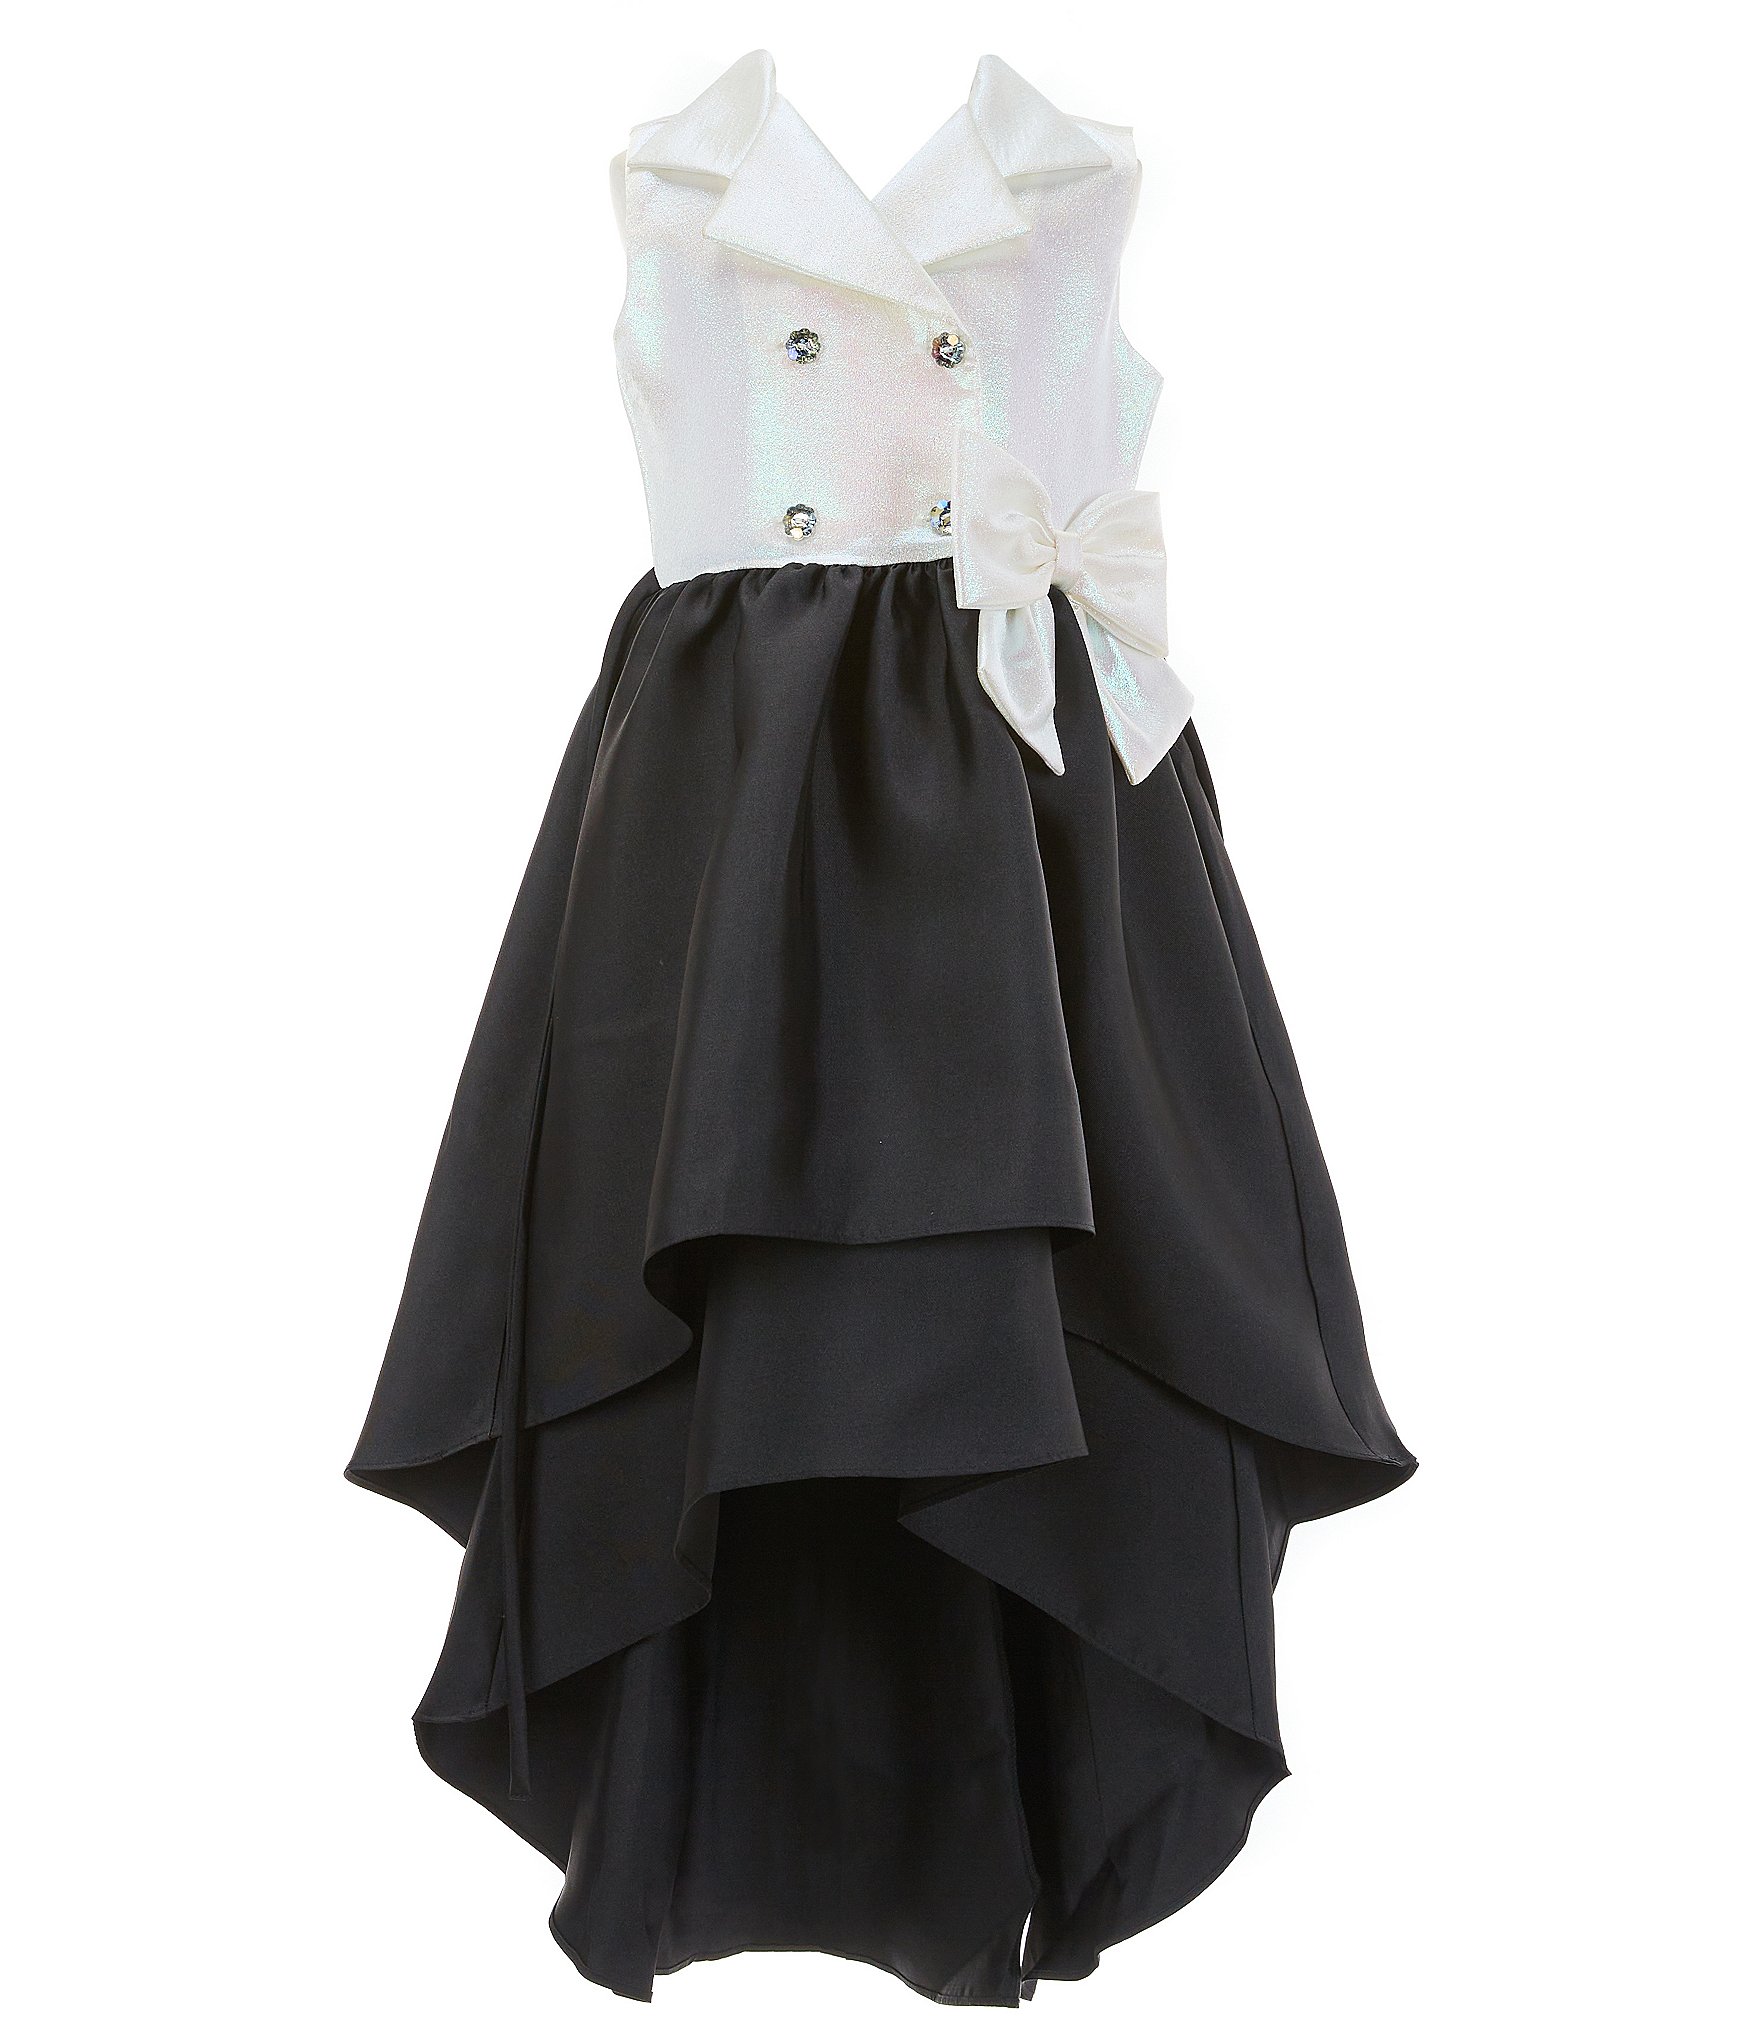 Bonnie Jean Big Girls 7-16 Sleeveless Bow-Accented Color Block Tuxedo ...